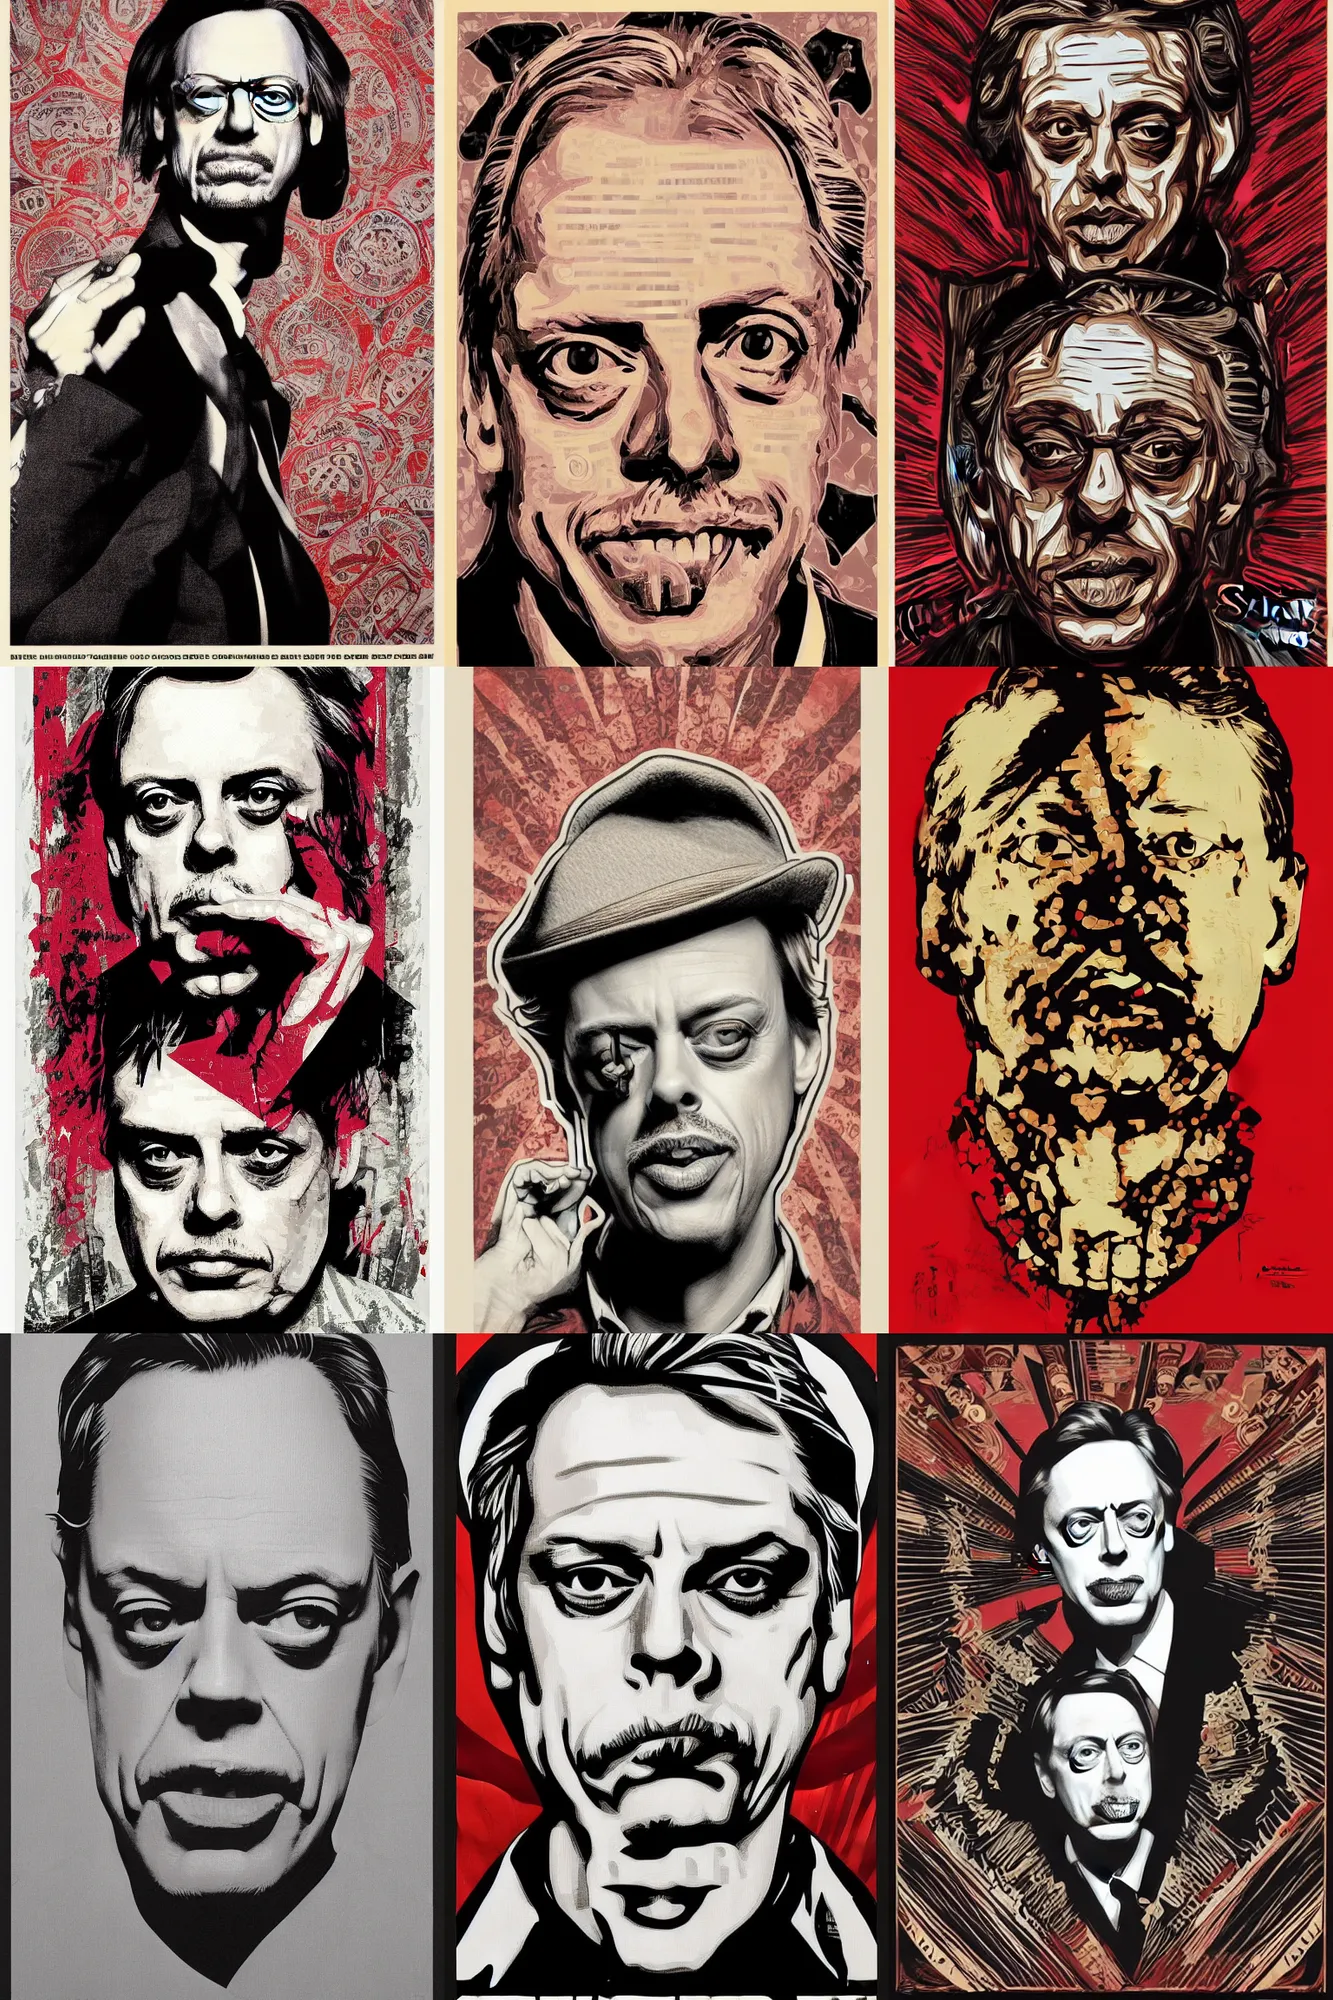 Prompt: face of Steve Buscemi, style of Shepard Fairey Obey Giant poster